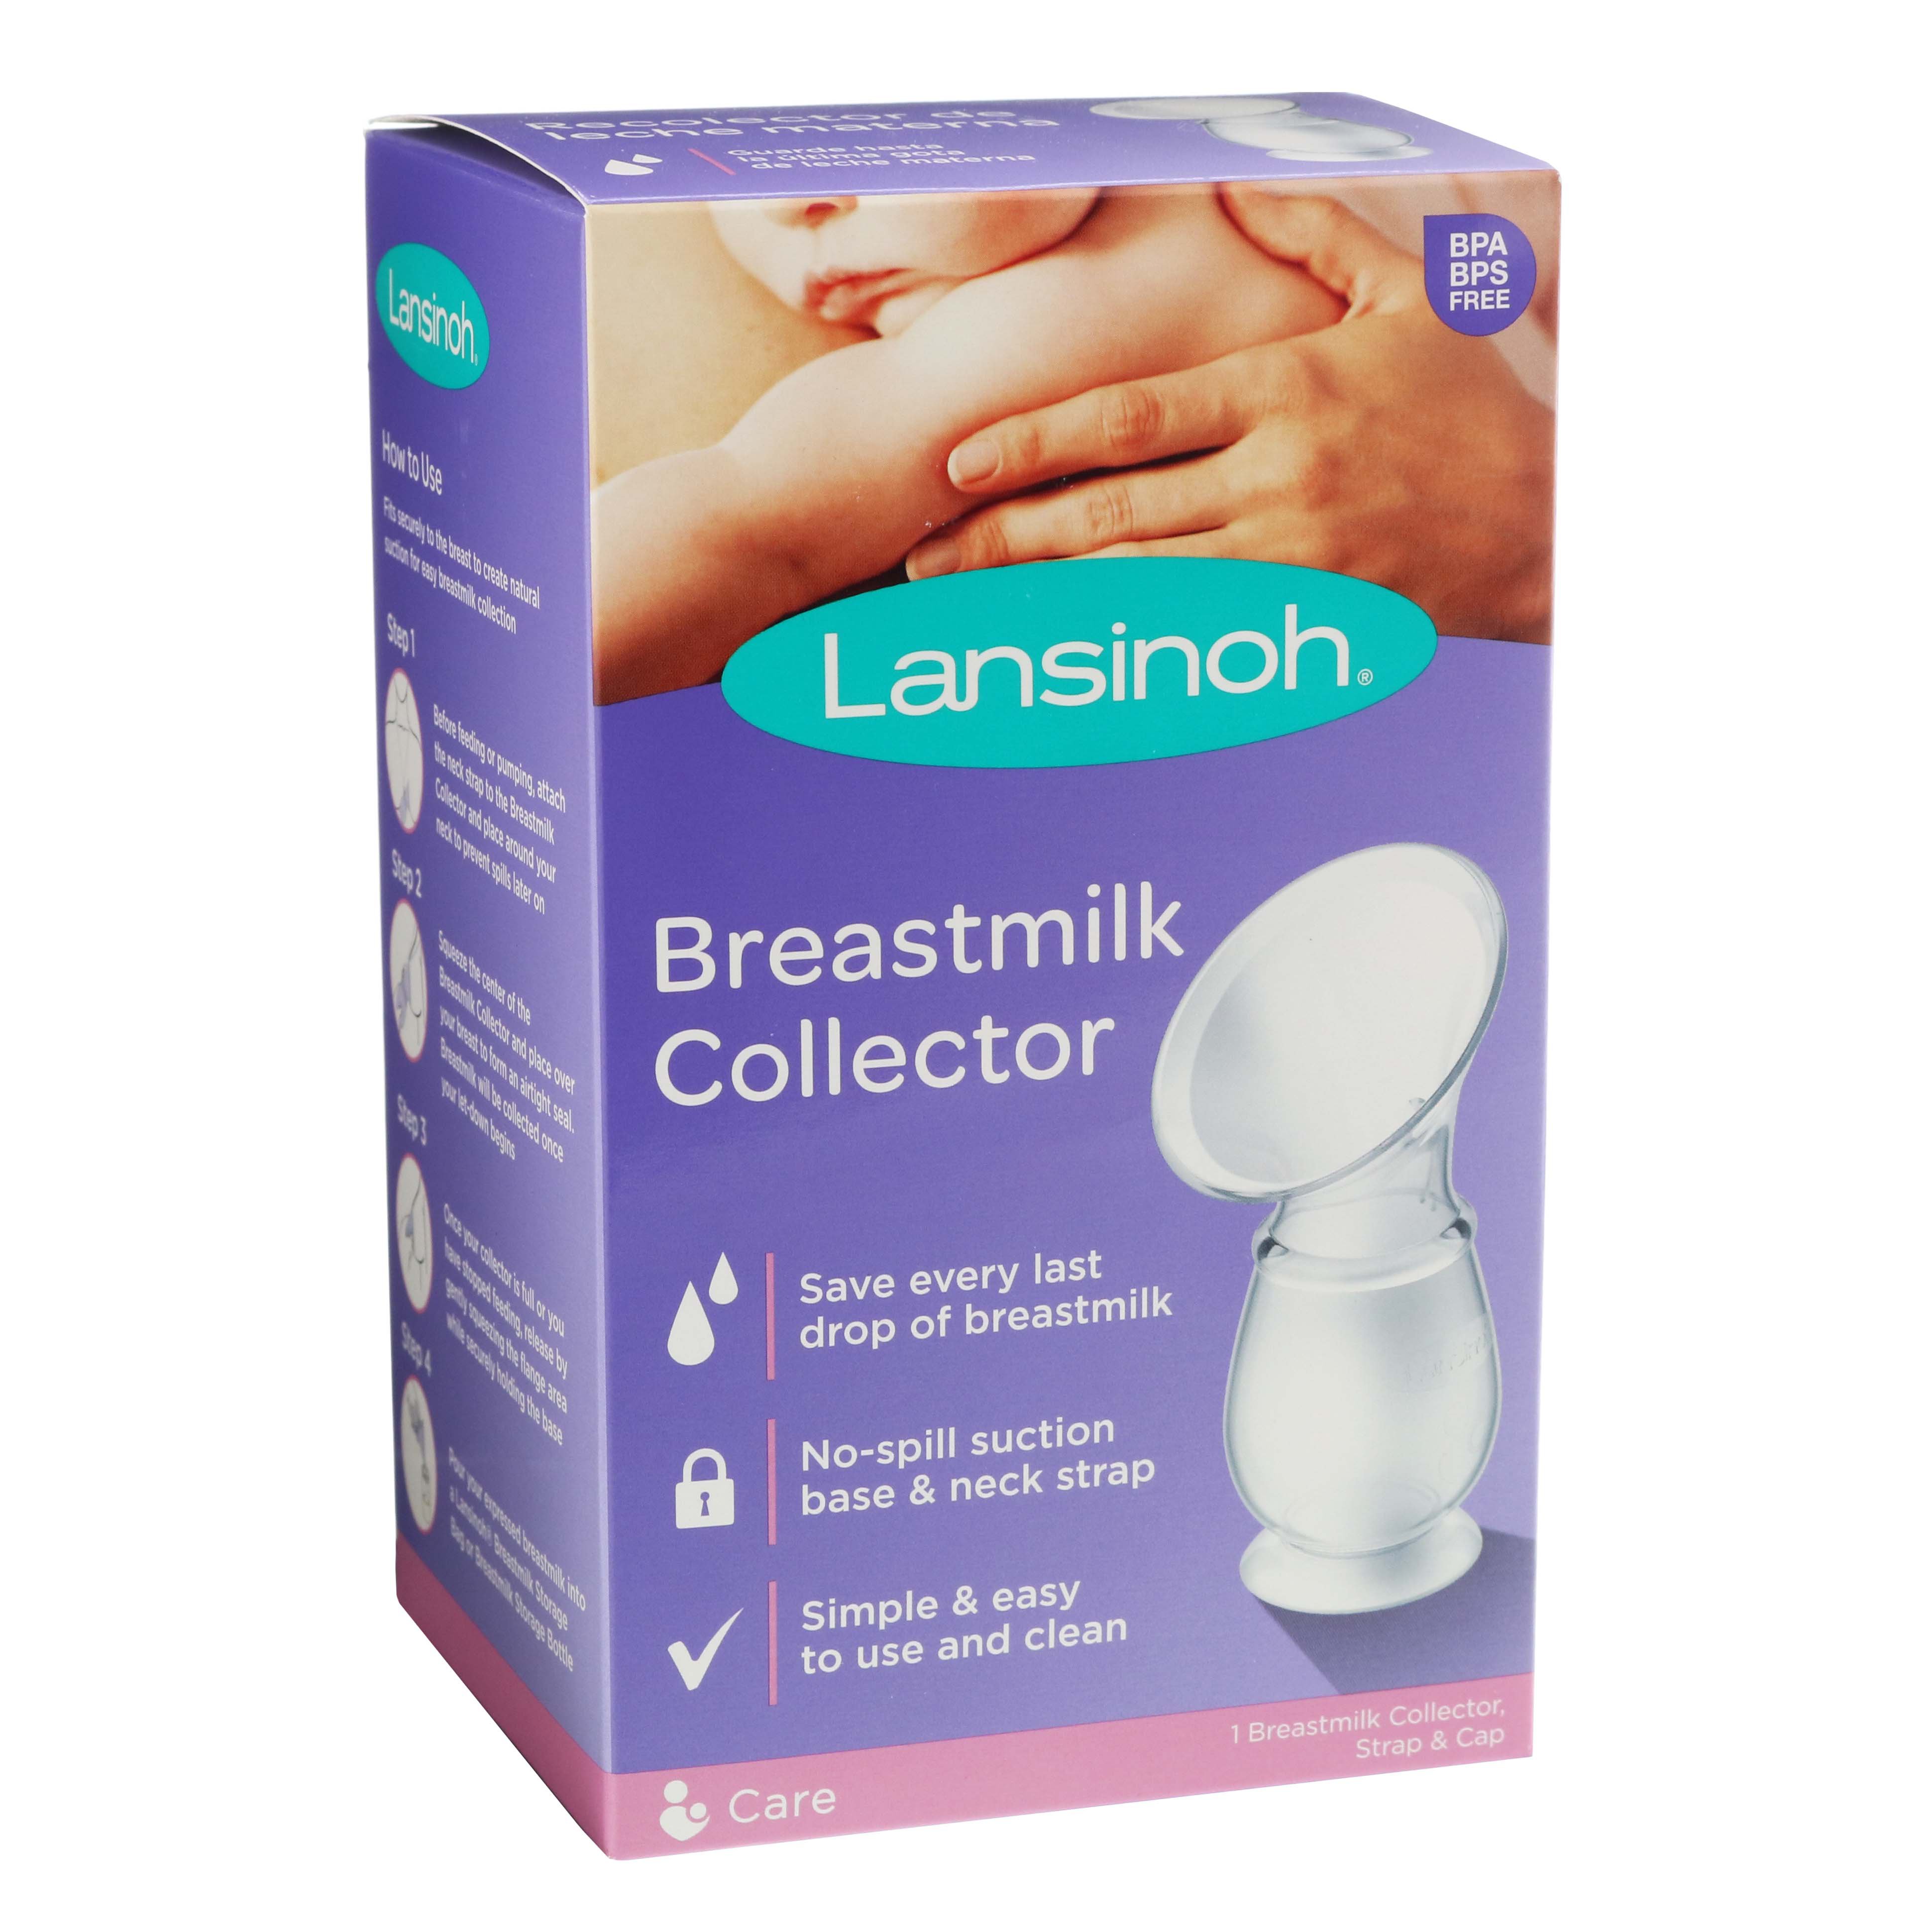 Lansinoh Breastmilk Collector - Shop Breast Feeding Accessories at H-E-B